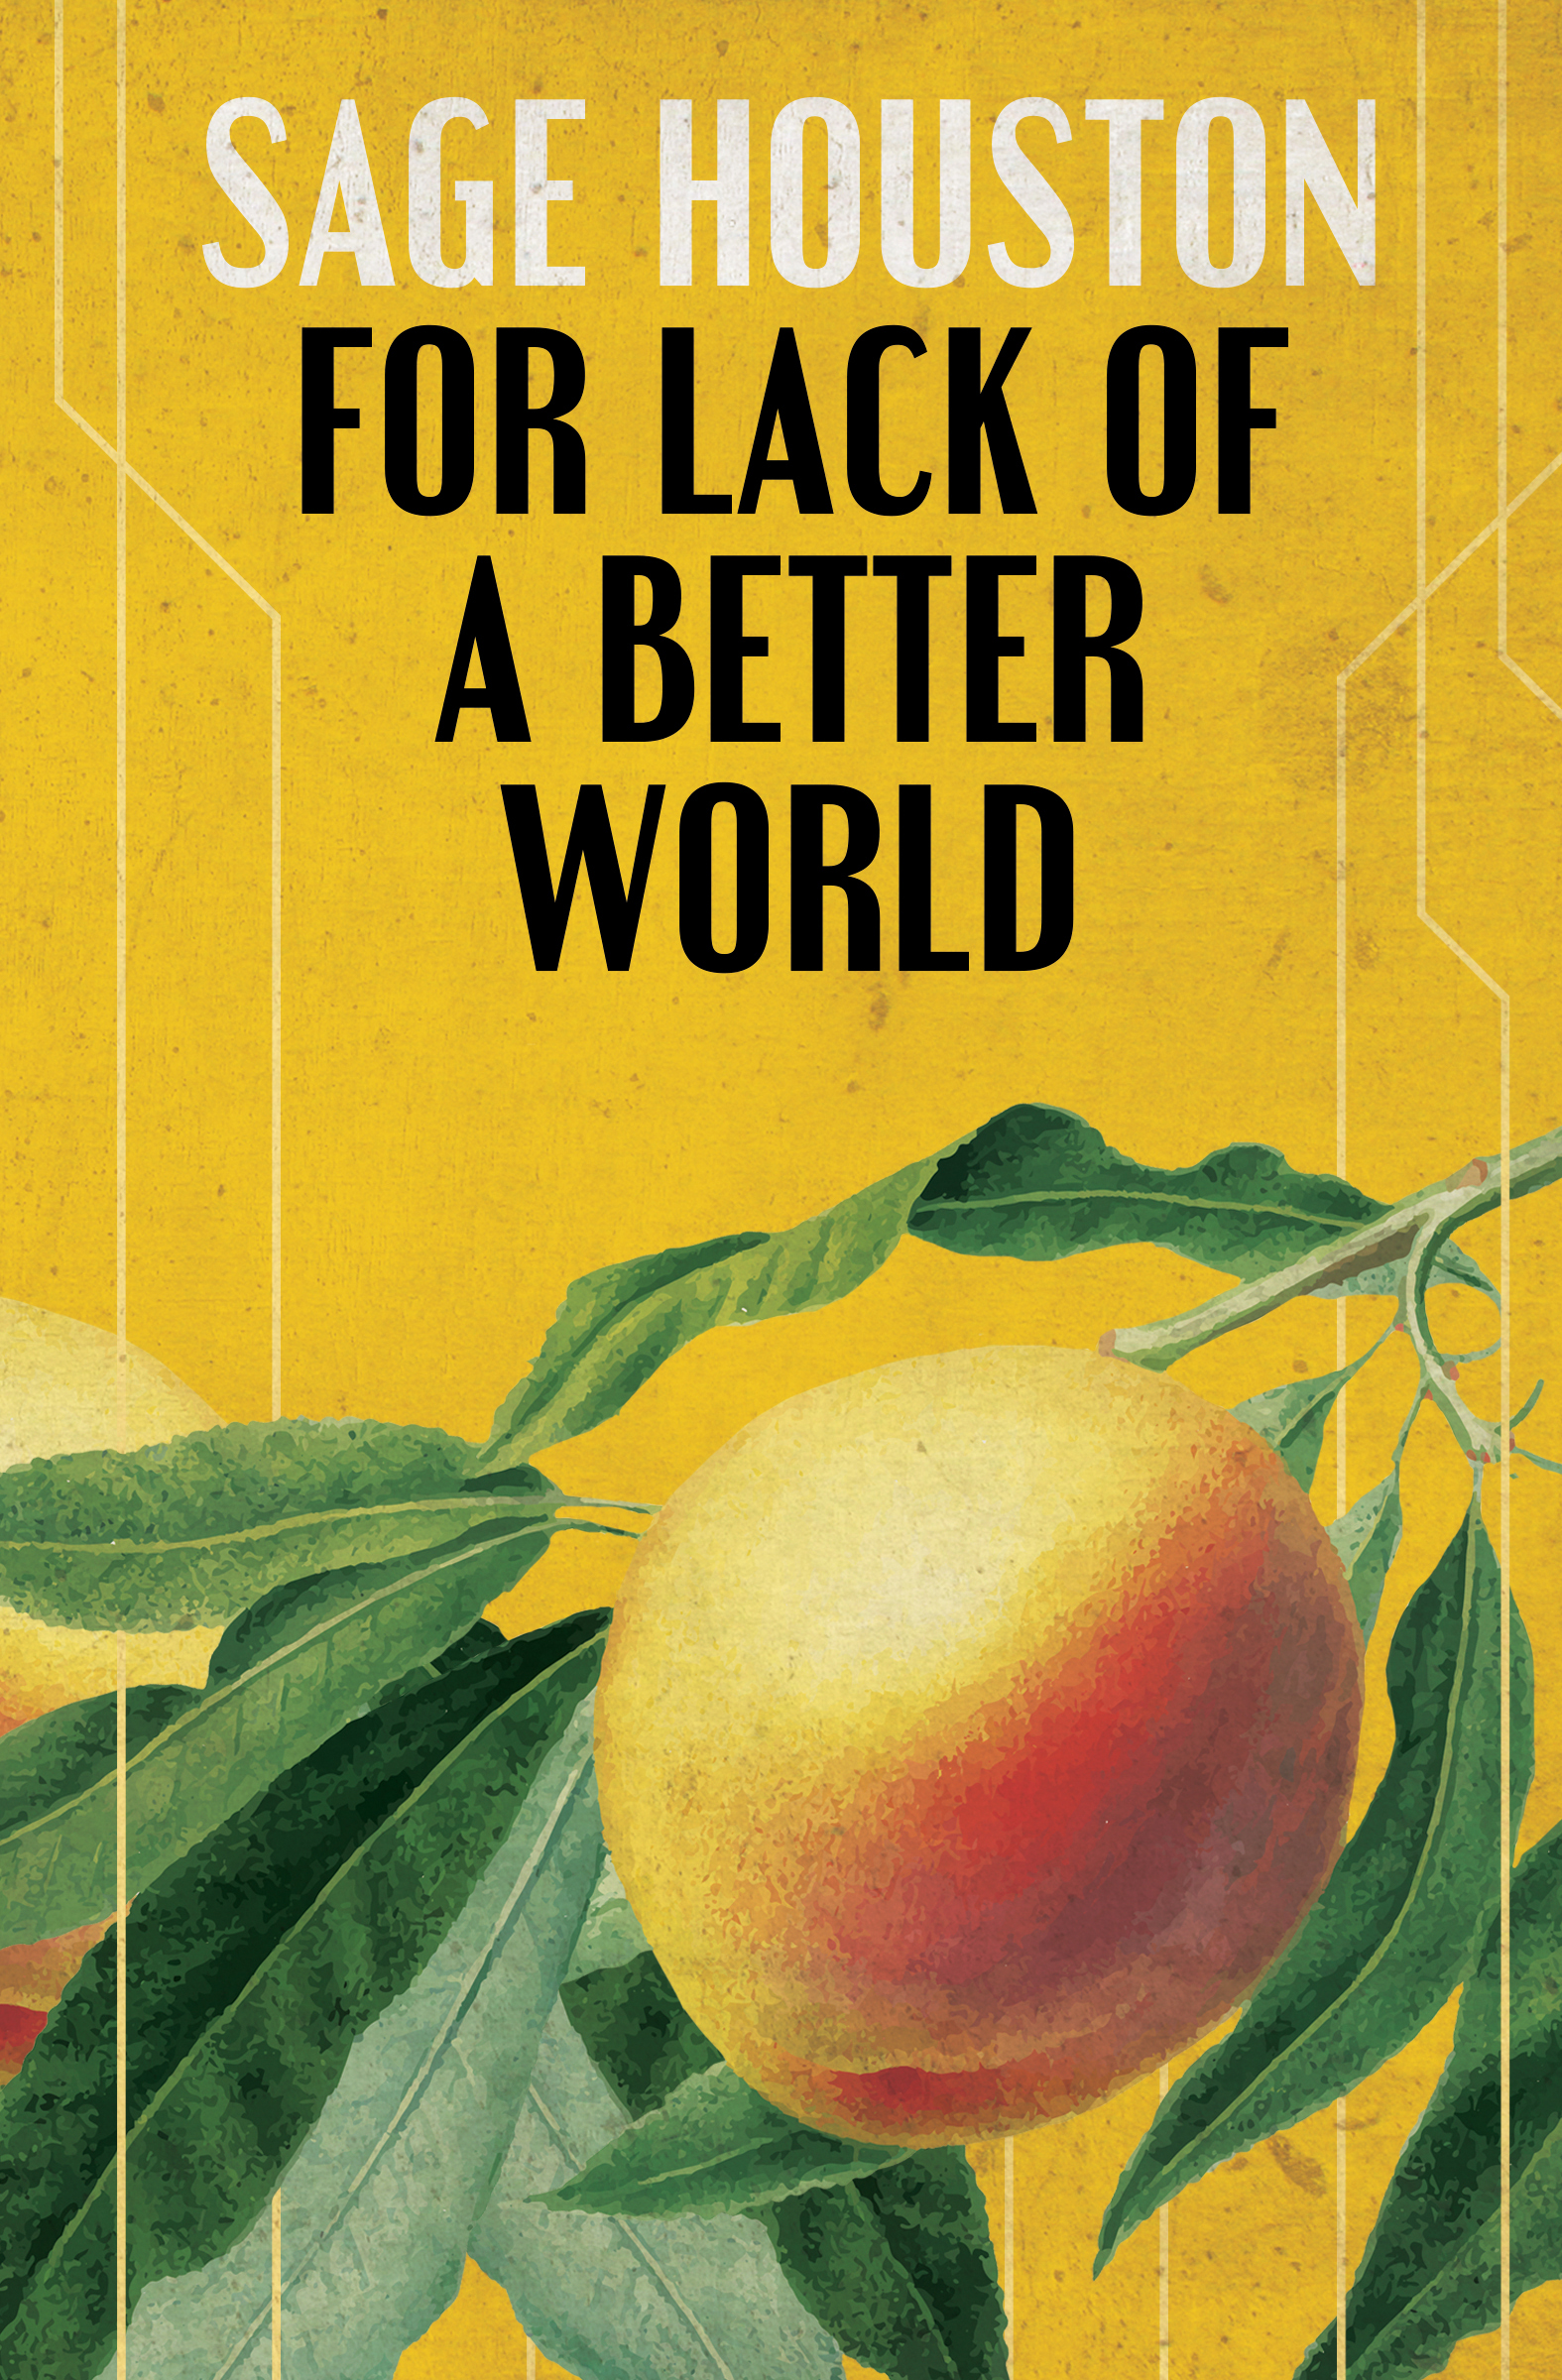 FREE: For Lack of a Better World by Sage Houston